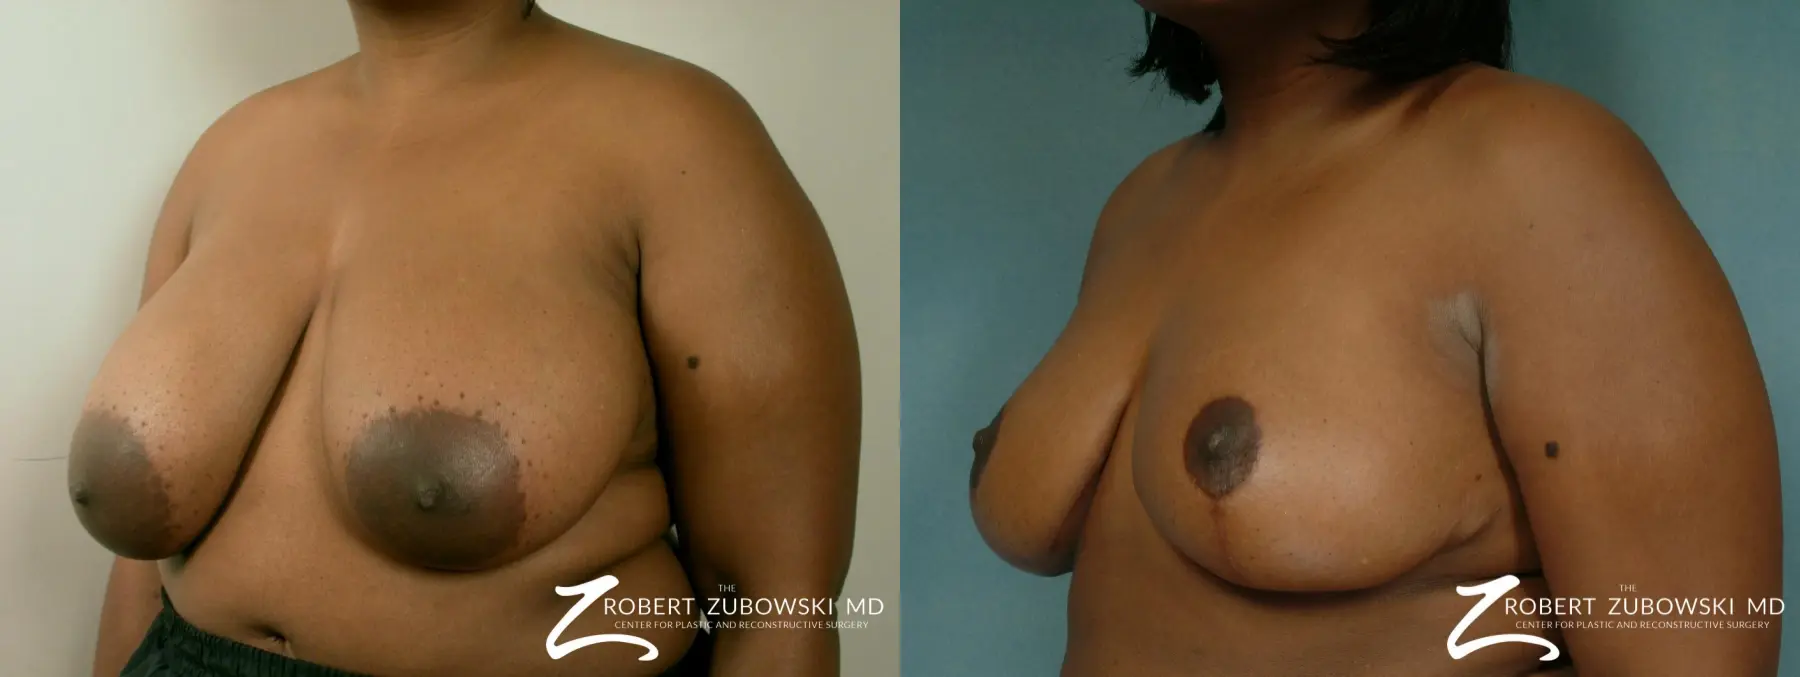 Breast Reduction: Patient 3 - Before and After 2